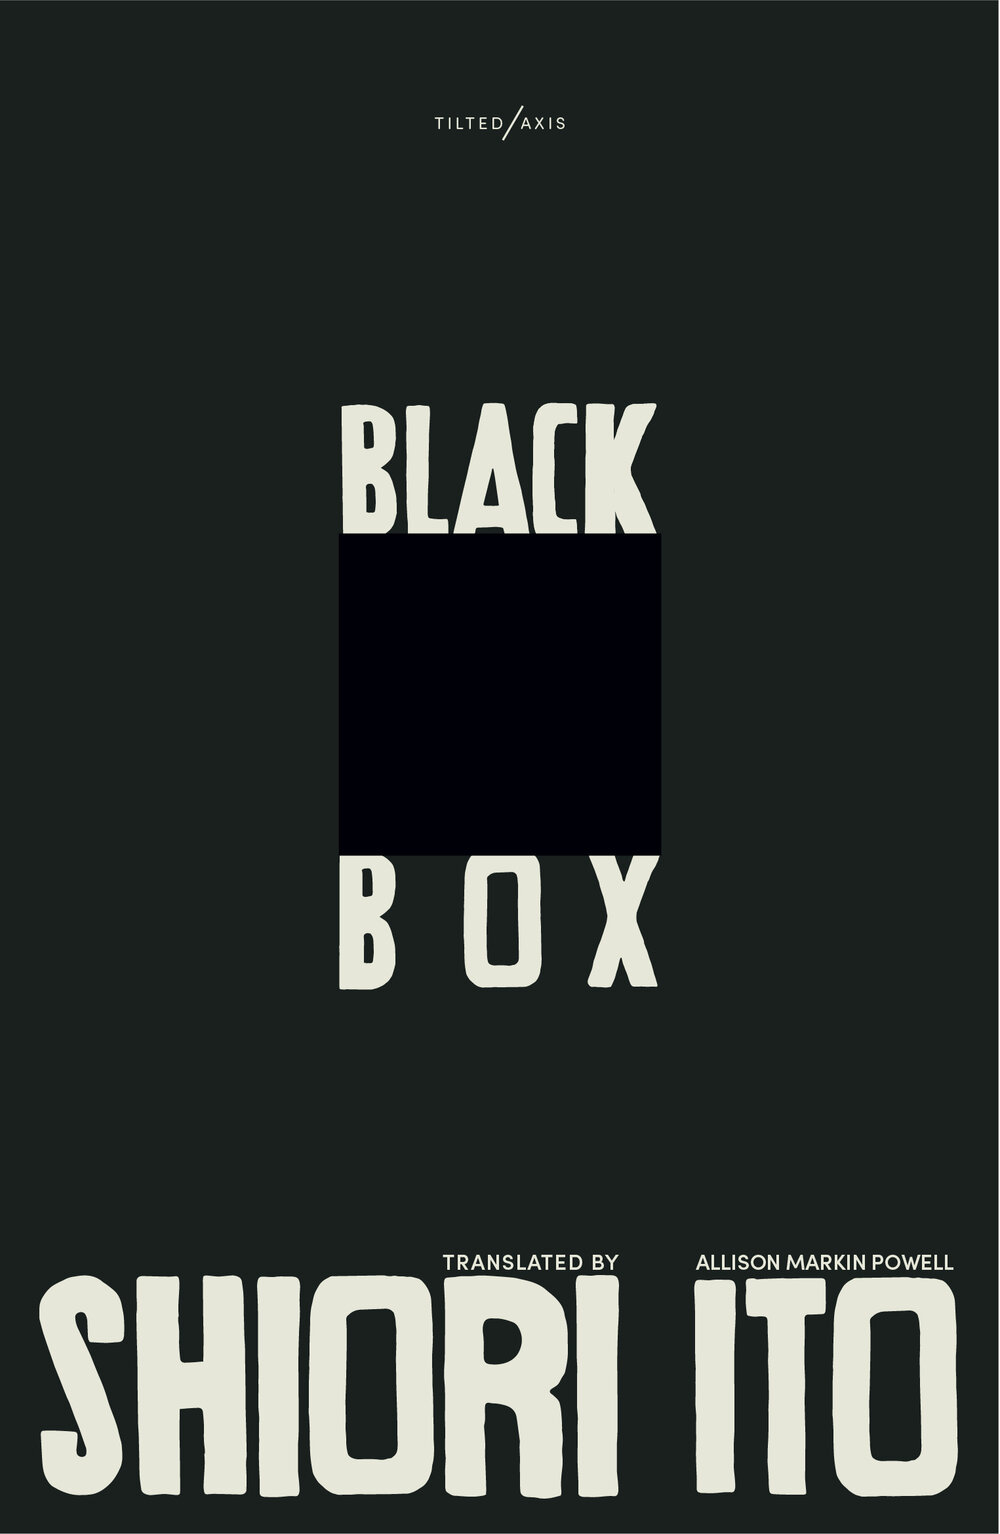 The front cover of the book titled Black Box published by Tilted Axis Press